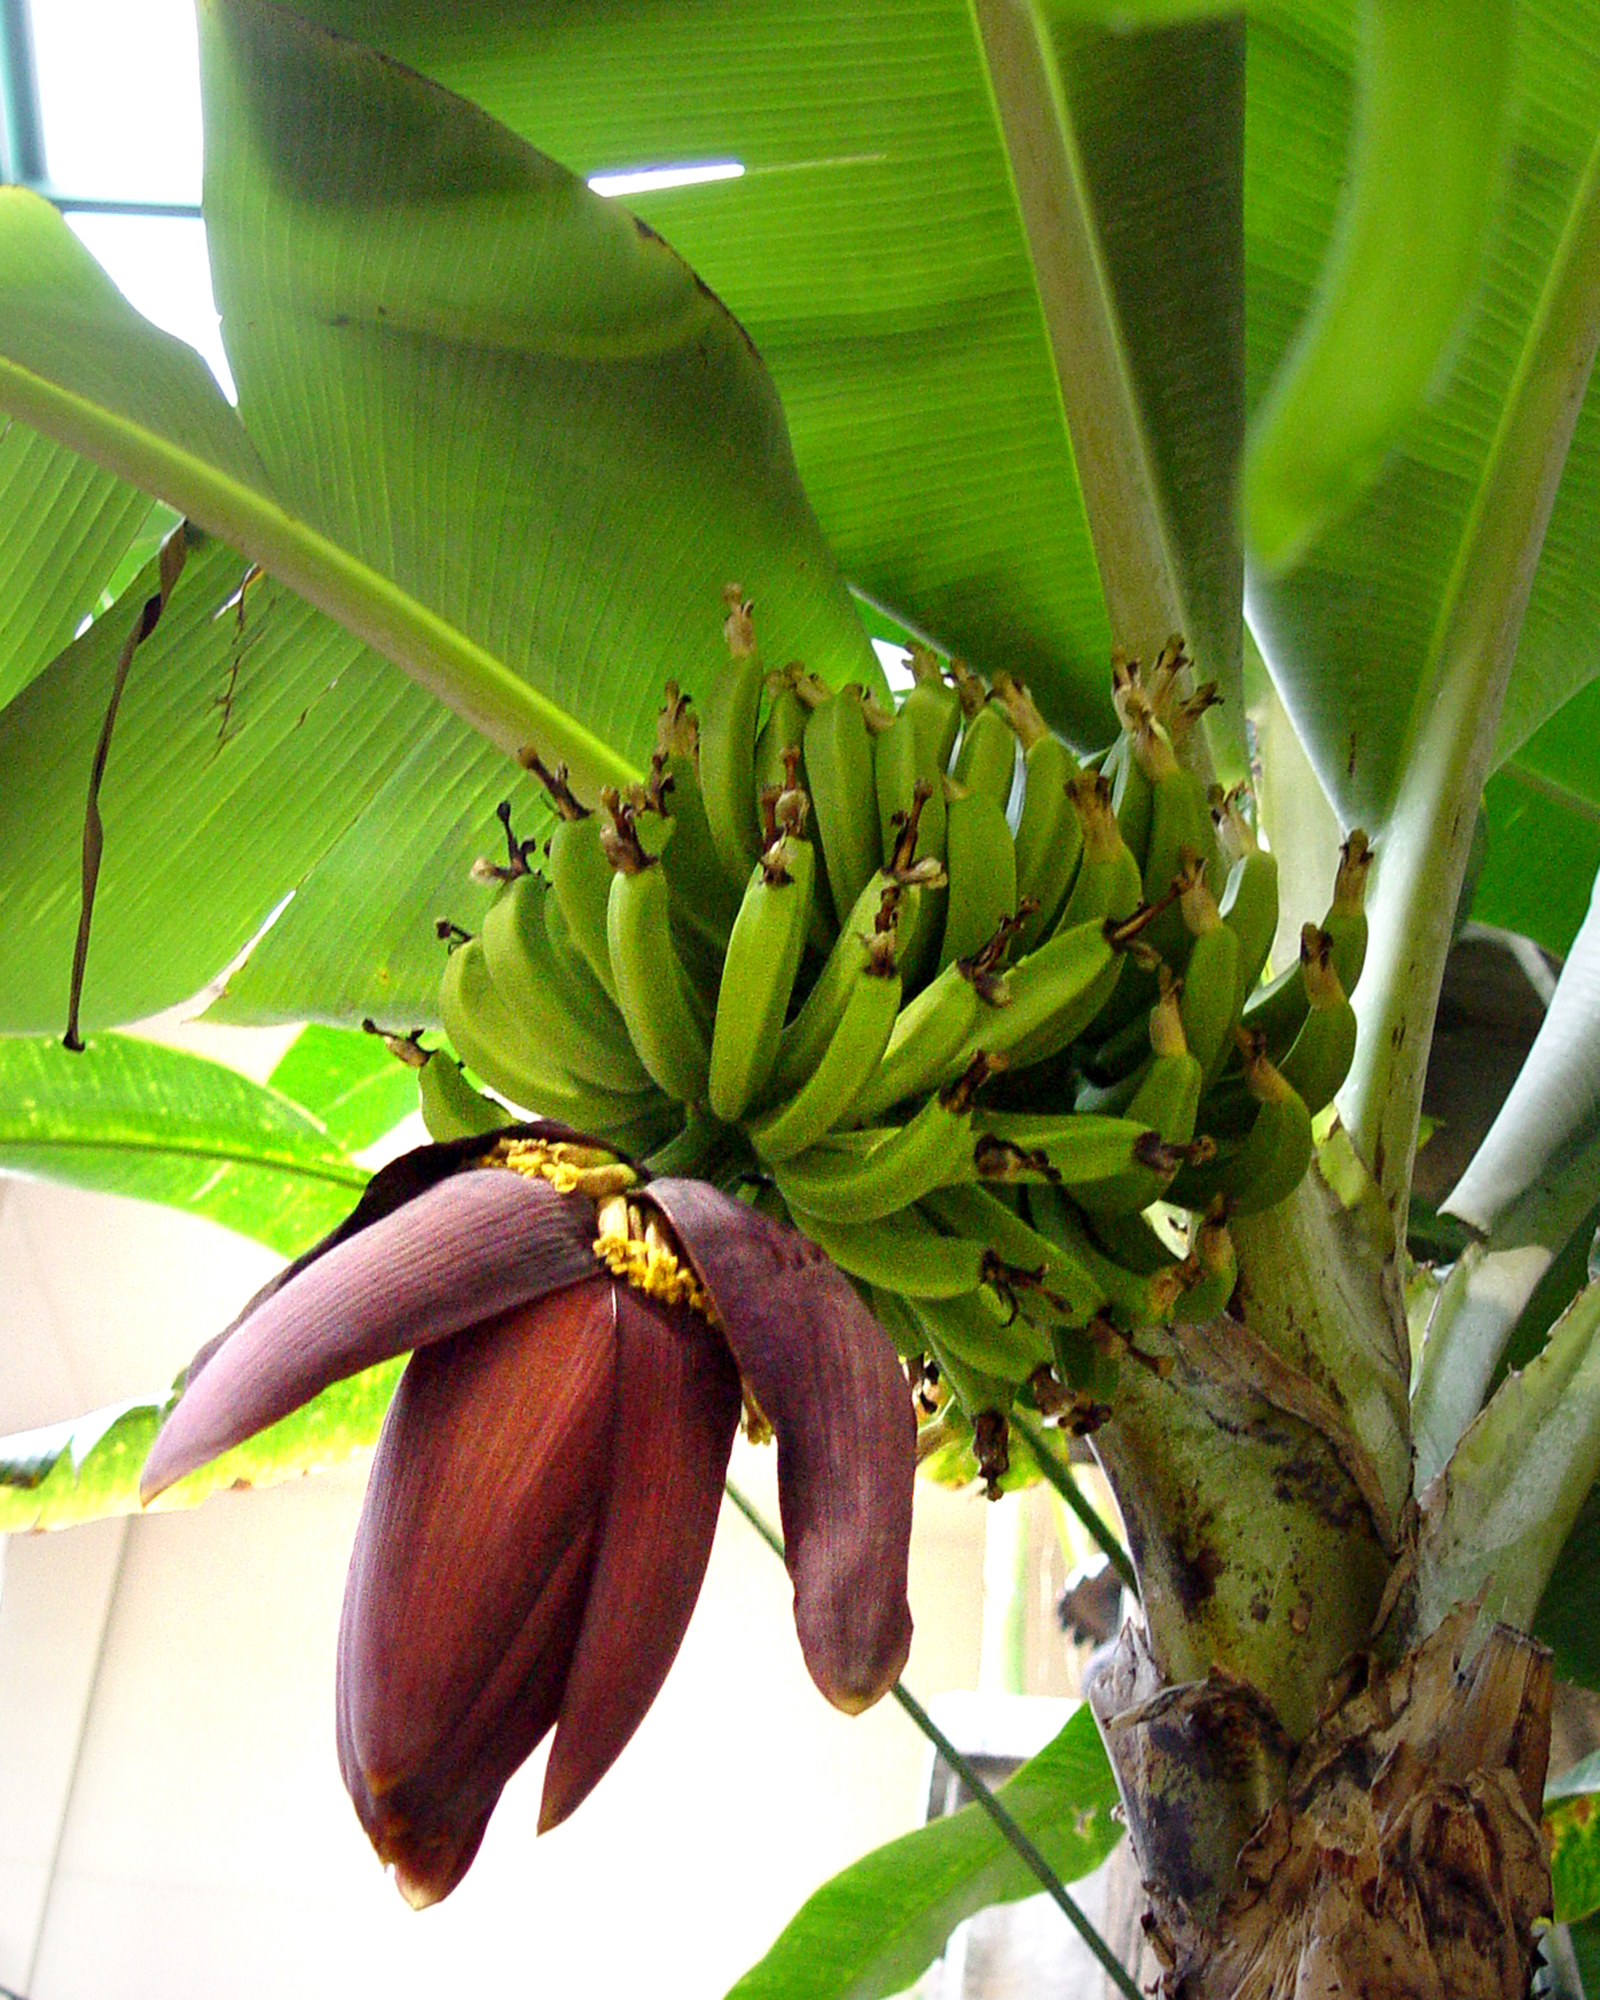 Banana Tree With Flower And Fruit Pics4learning,10th Anniversary Gifts For Him